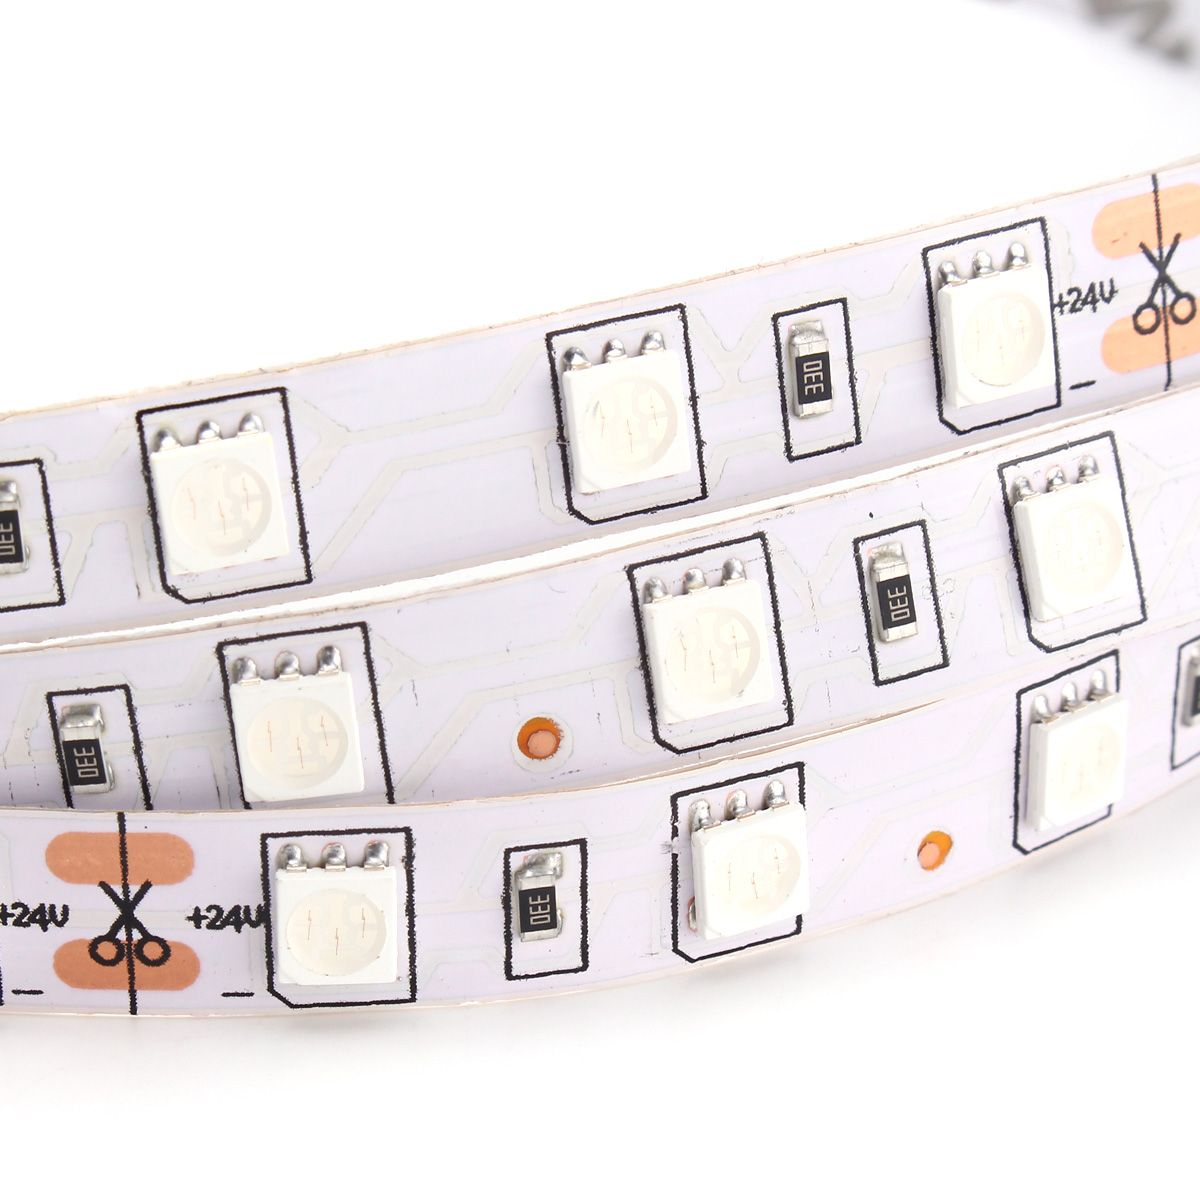 5M-72W-SMD5050-Non-Waterproof-300LEDs-Flexible-Strip-Tape-Light-for-Home-Decoration-DC24V-1178146